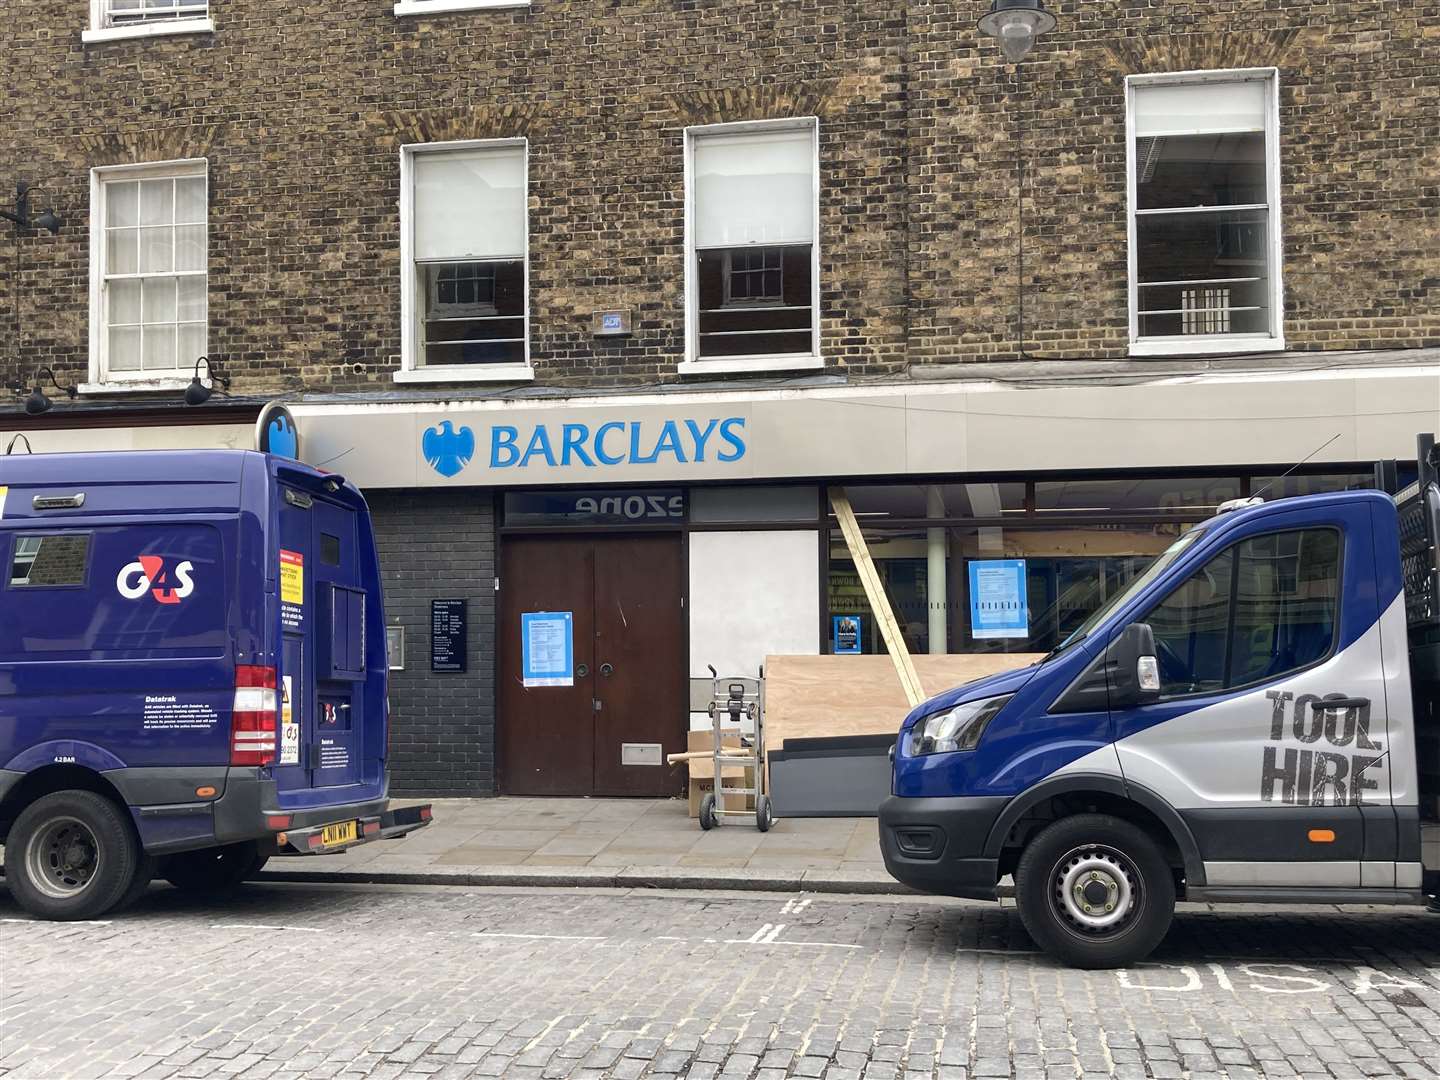 Barclays Bank has already closed its Sheerness branch earlier this year